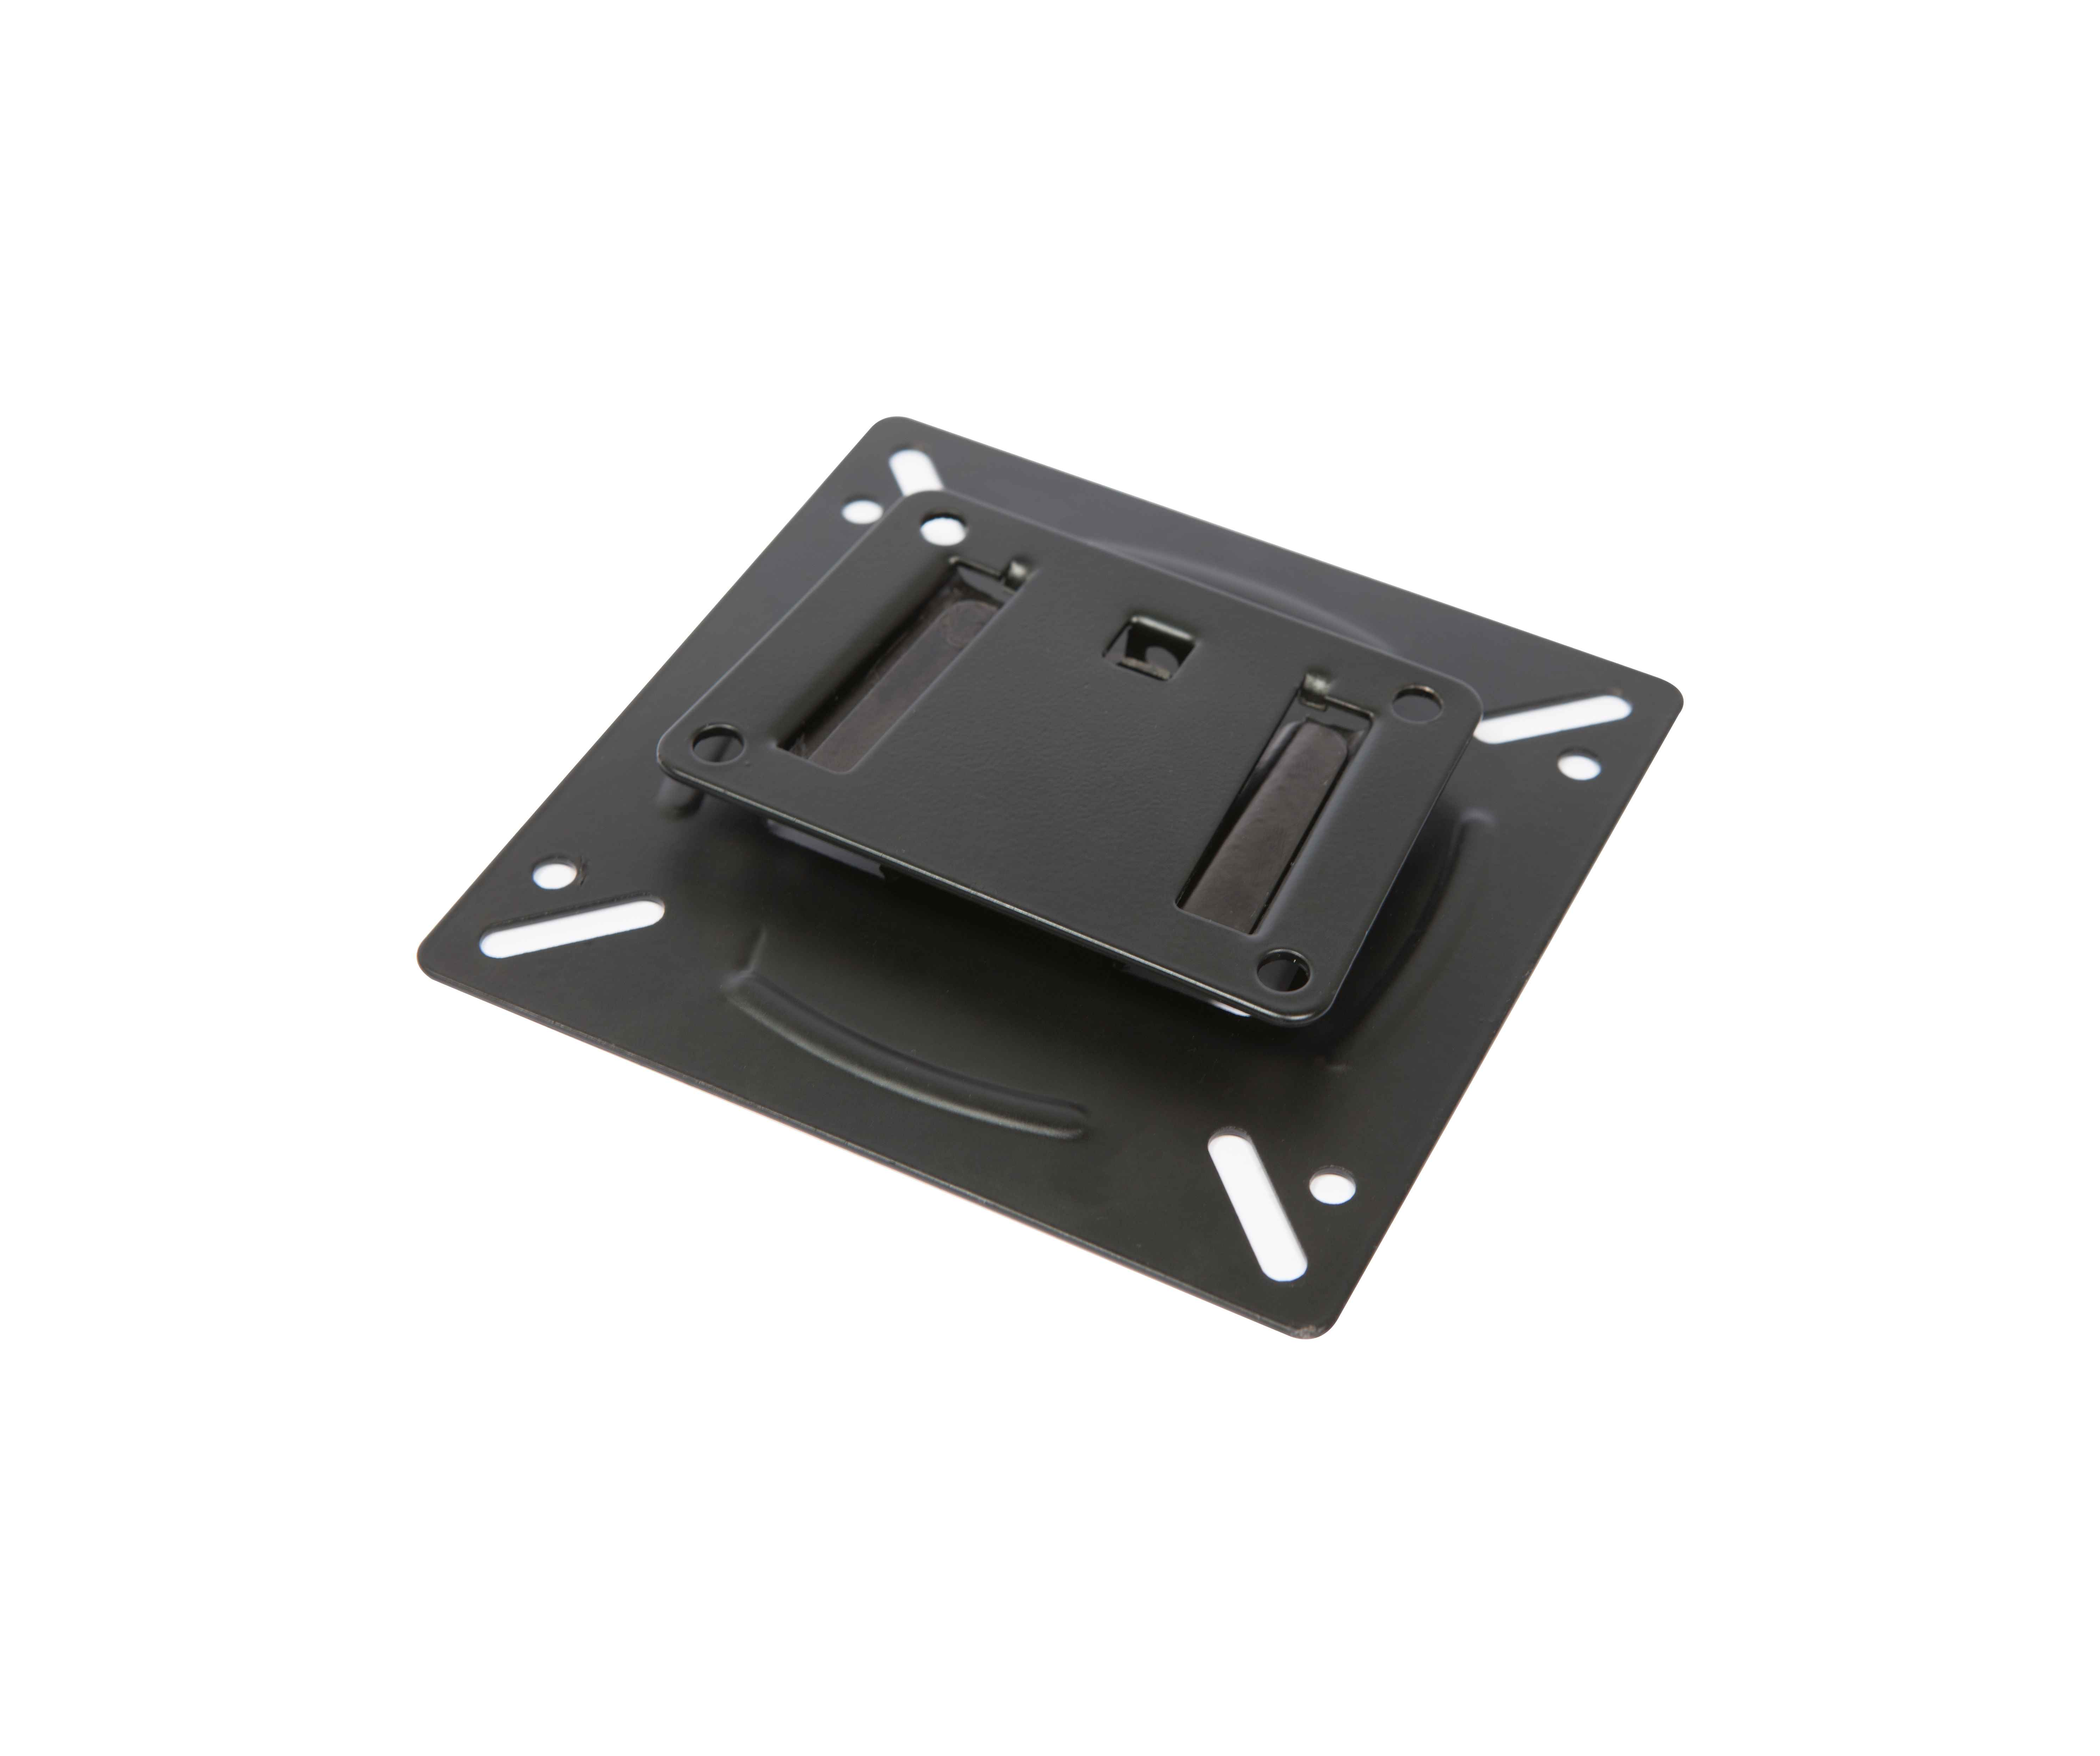 VESA wall mount for tablet, monitors very flat with securing